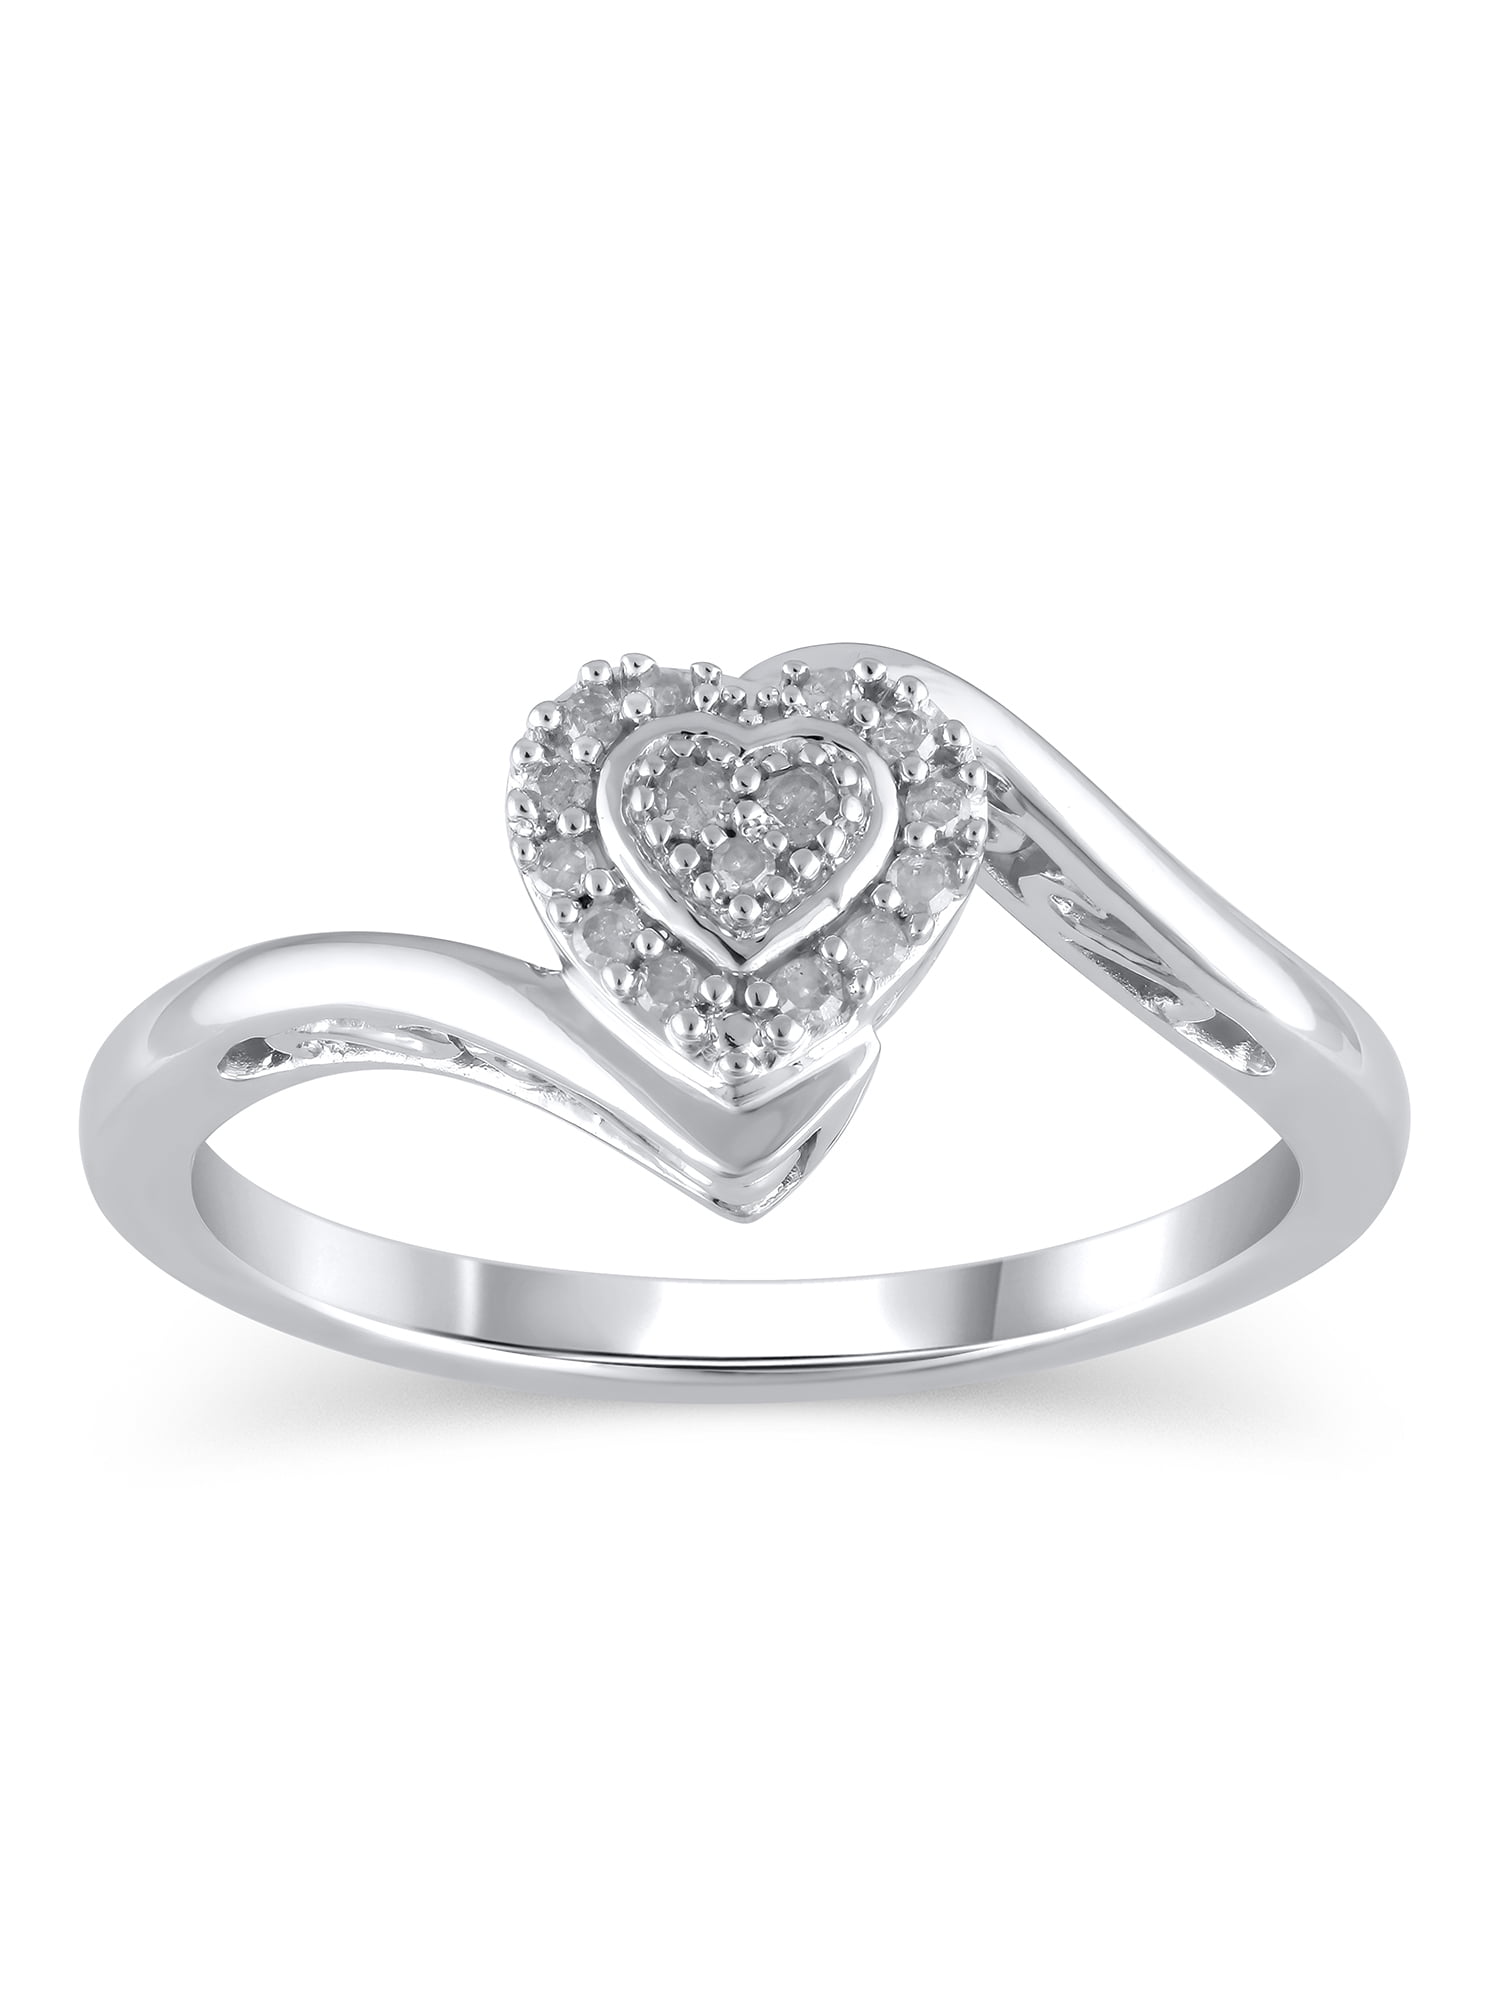 14K White Gold Diamond Accented Open Heart Ring with Pavé Set Gems J-K Color, I1-I2 Clarity 